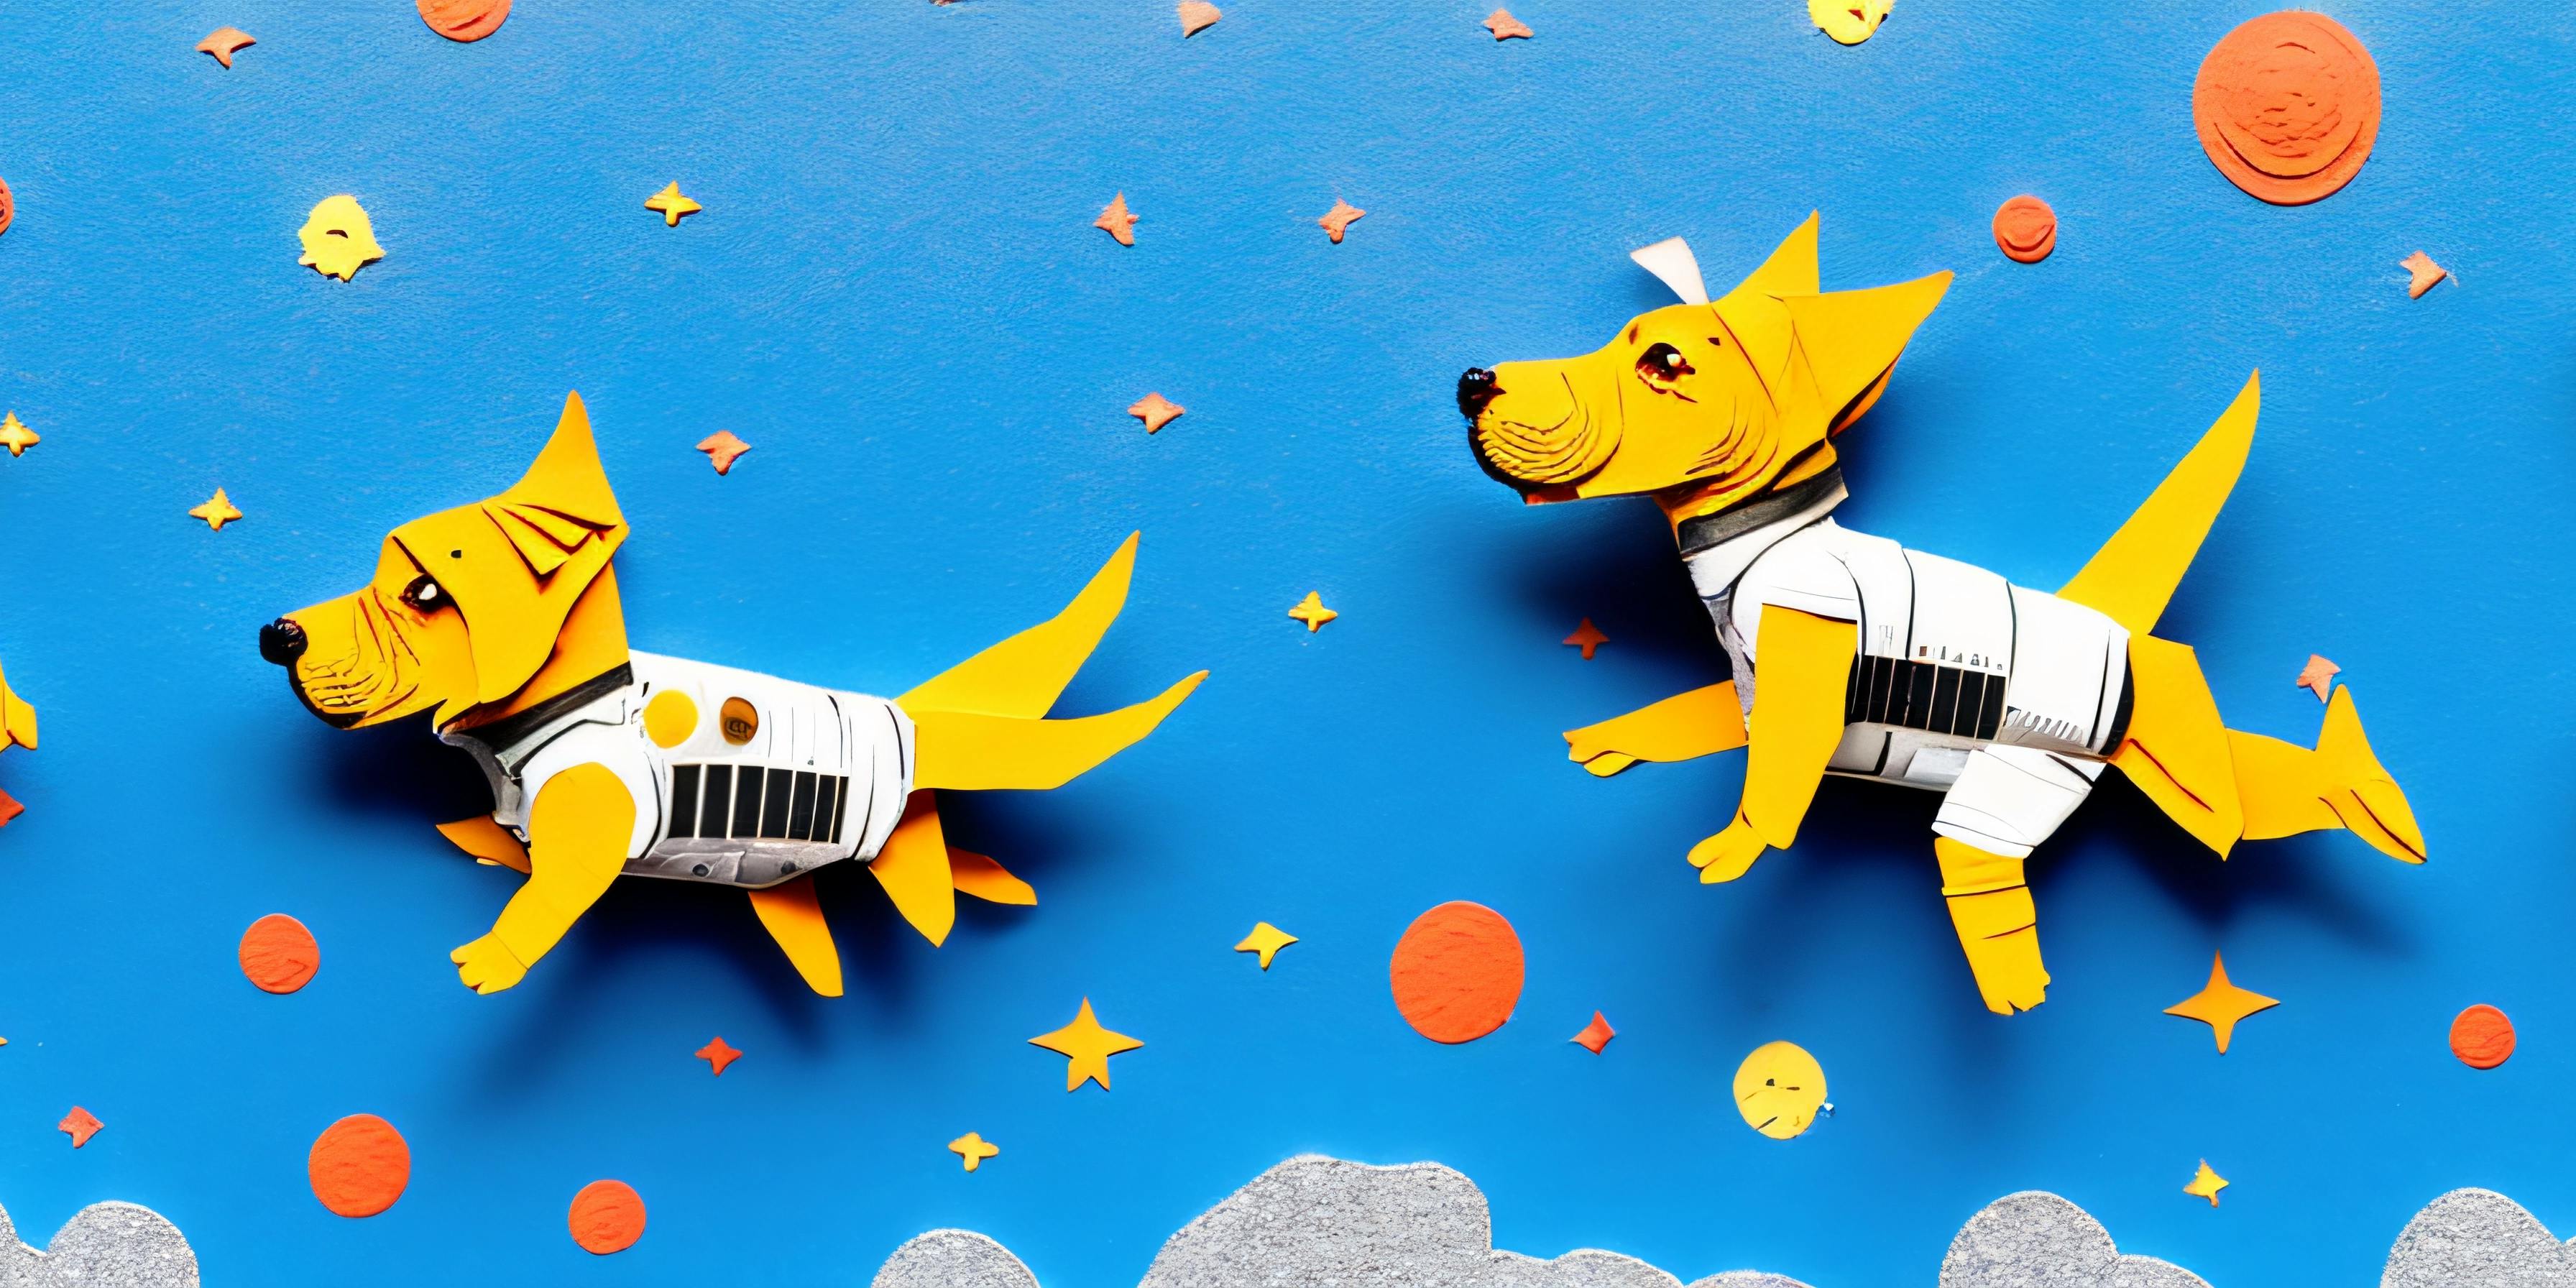 Papercut pit bulls waring space suits flying and playing fetch